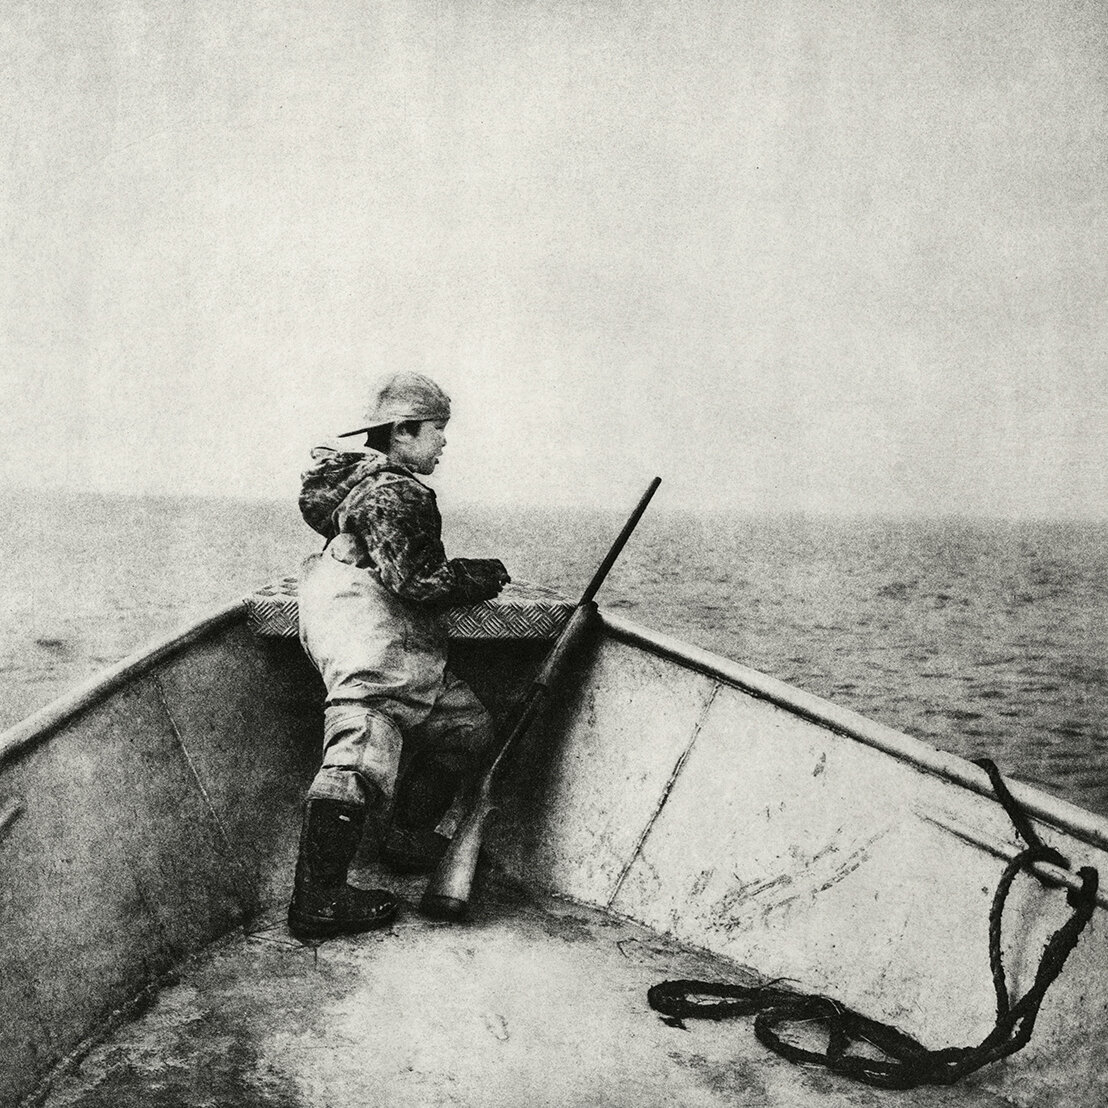  February 2020 - “Looking For Seals” by Alice Bailey, 2019, copperplate photogravure 